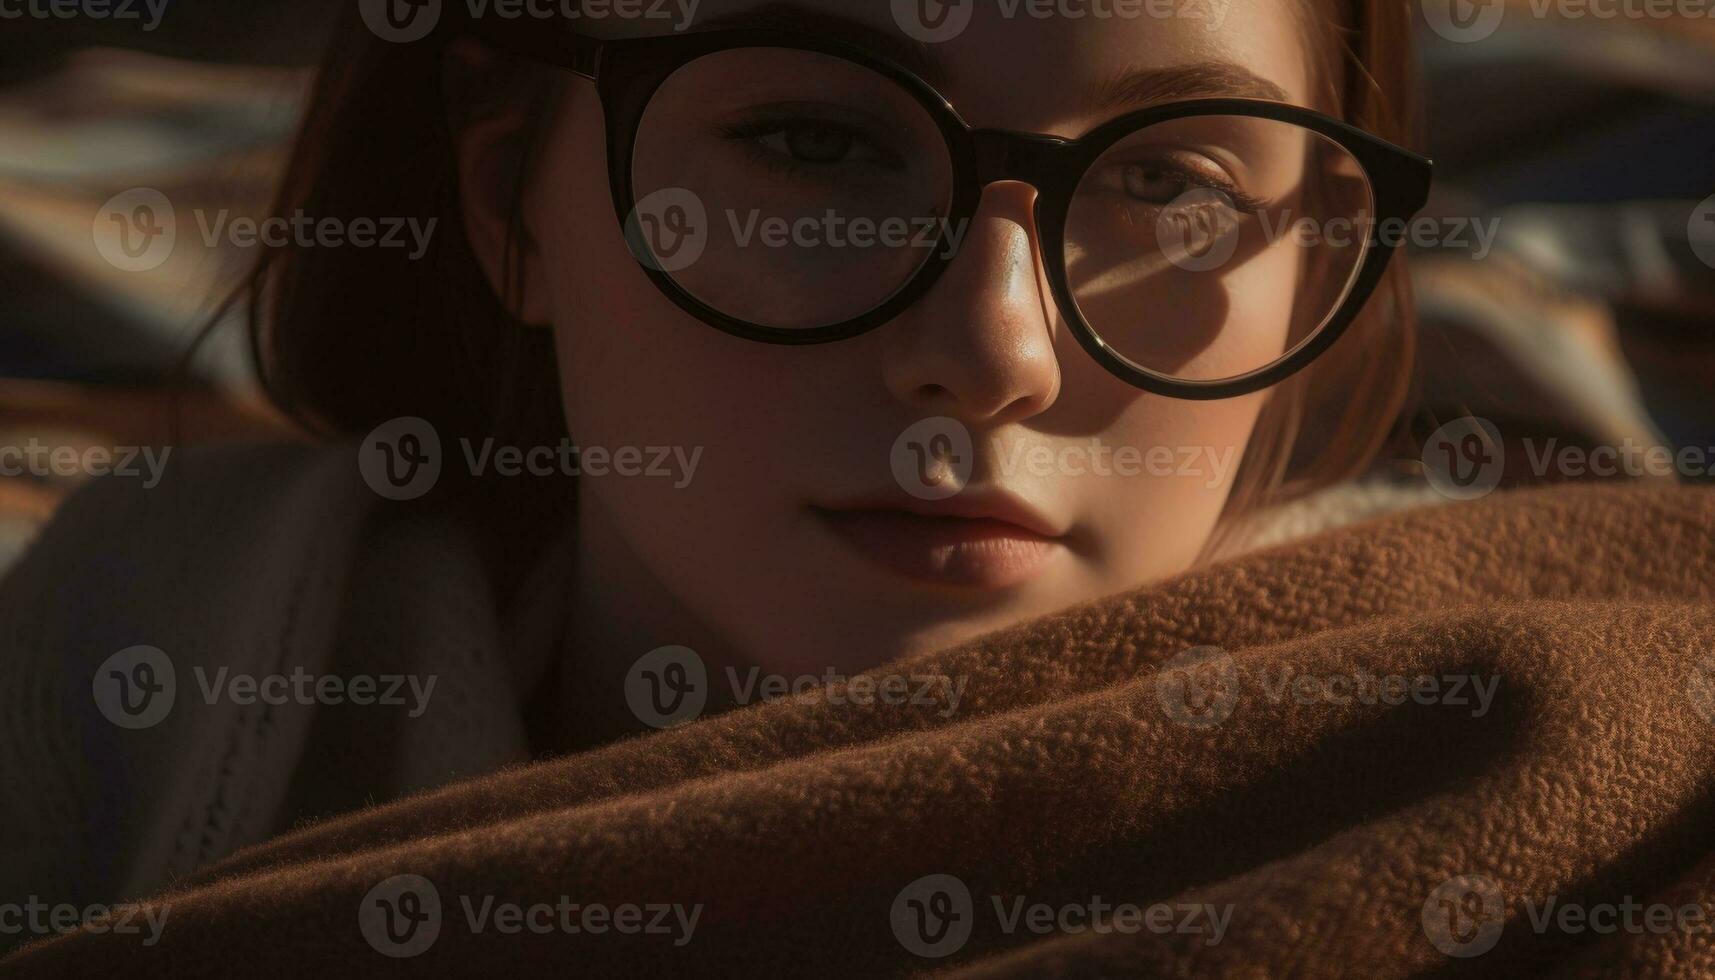 One young adult woman, with brown hair and eyeglasses, looking generated by AI photo